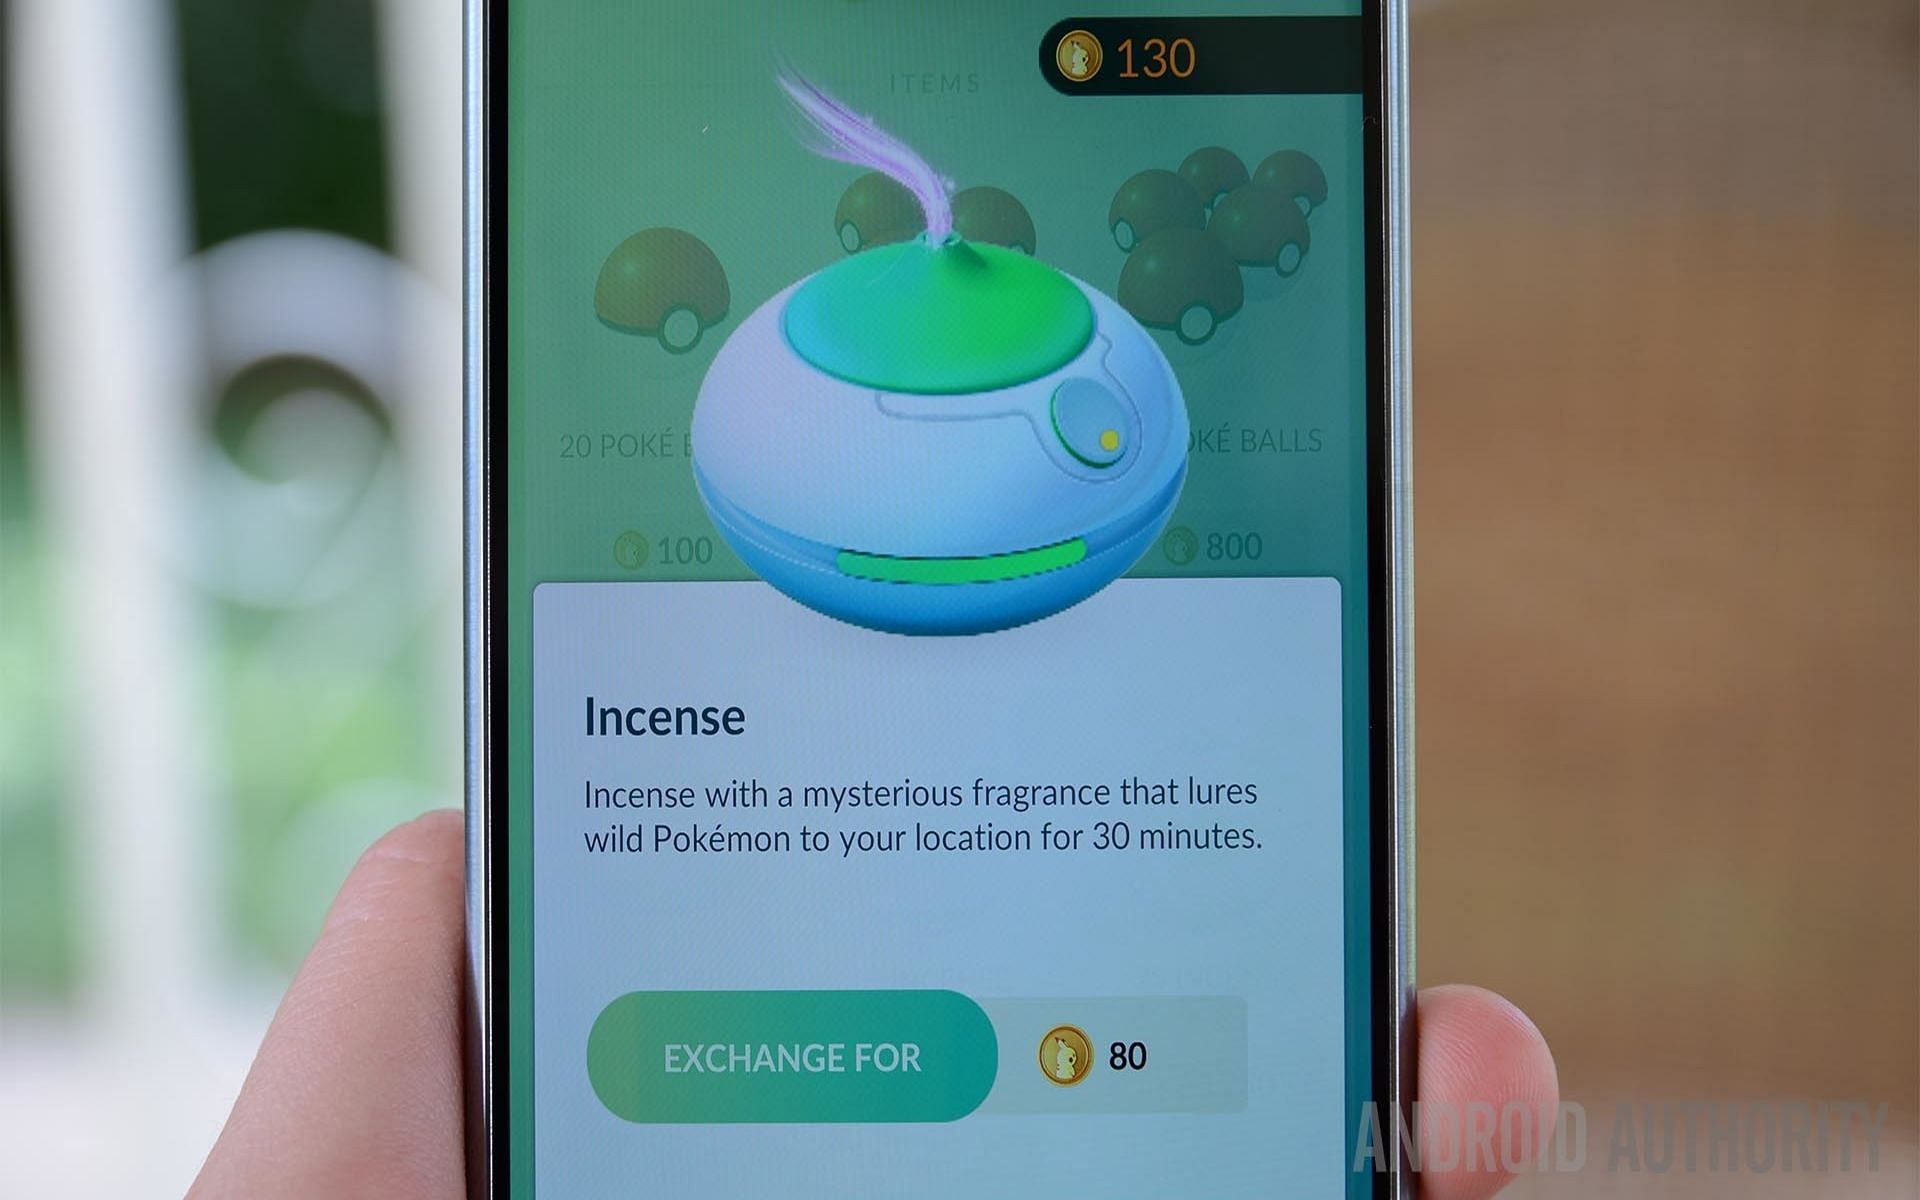 Incense can allow Pokemon to spawn more frequently (Image via Niantic)